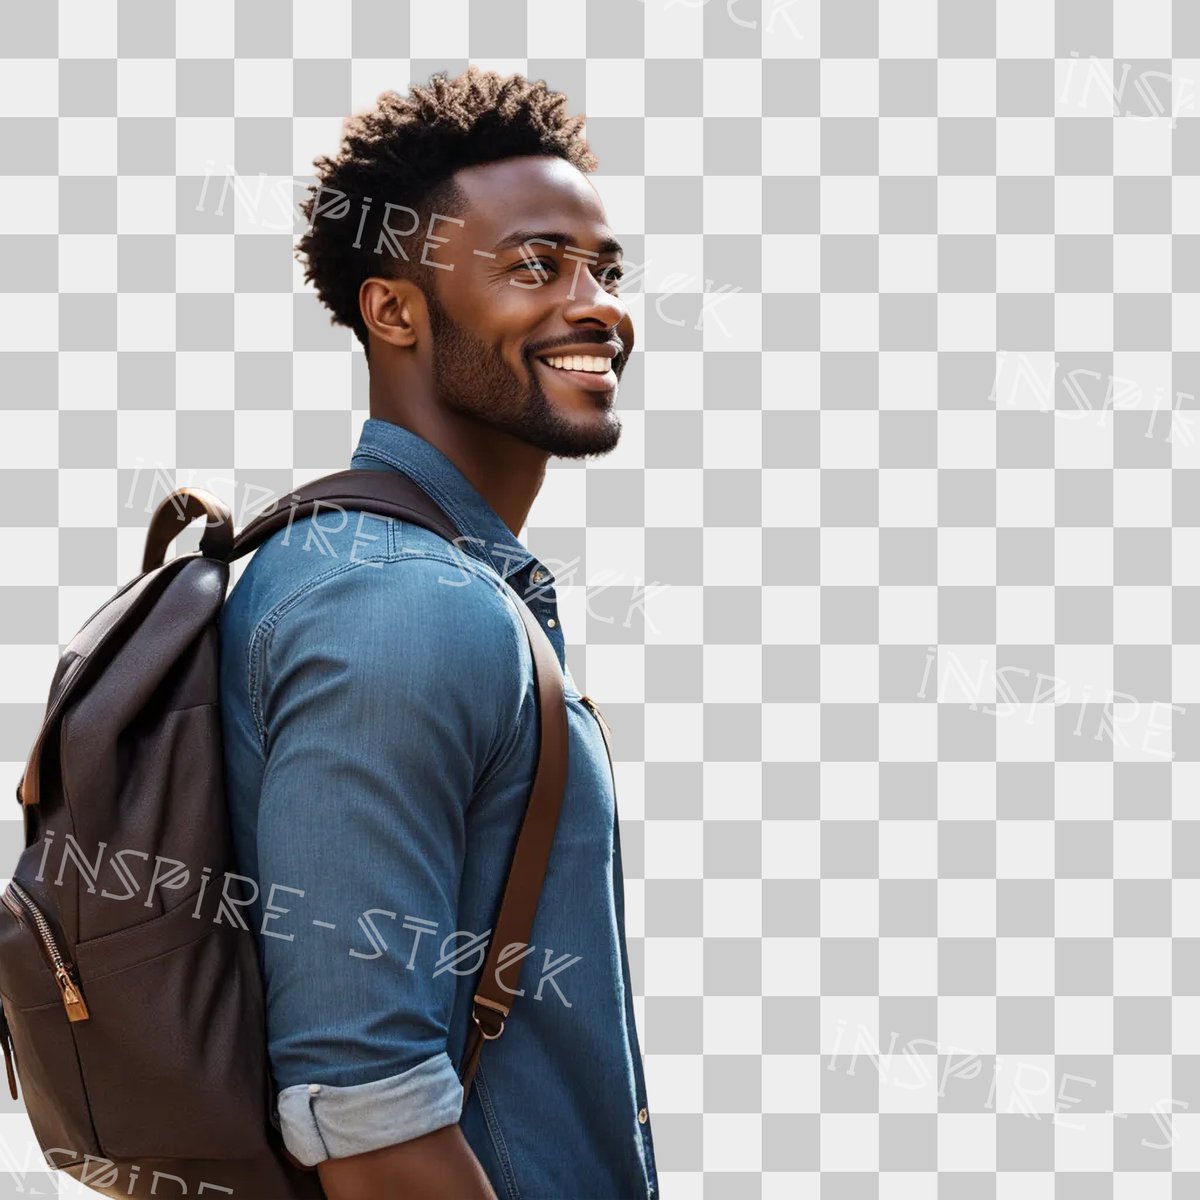 Discover high-quality images of black men and women for your next project.  #BlackOwned #BlackOwnedBusiness #BlackEntrepreneur #InspireStock